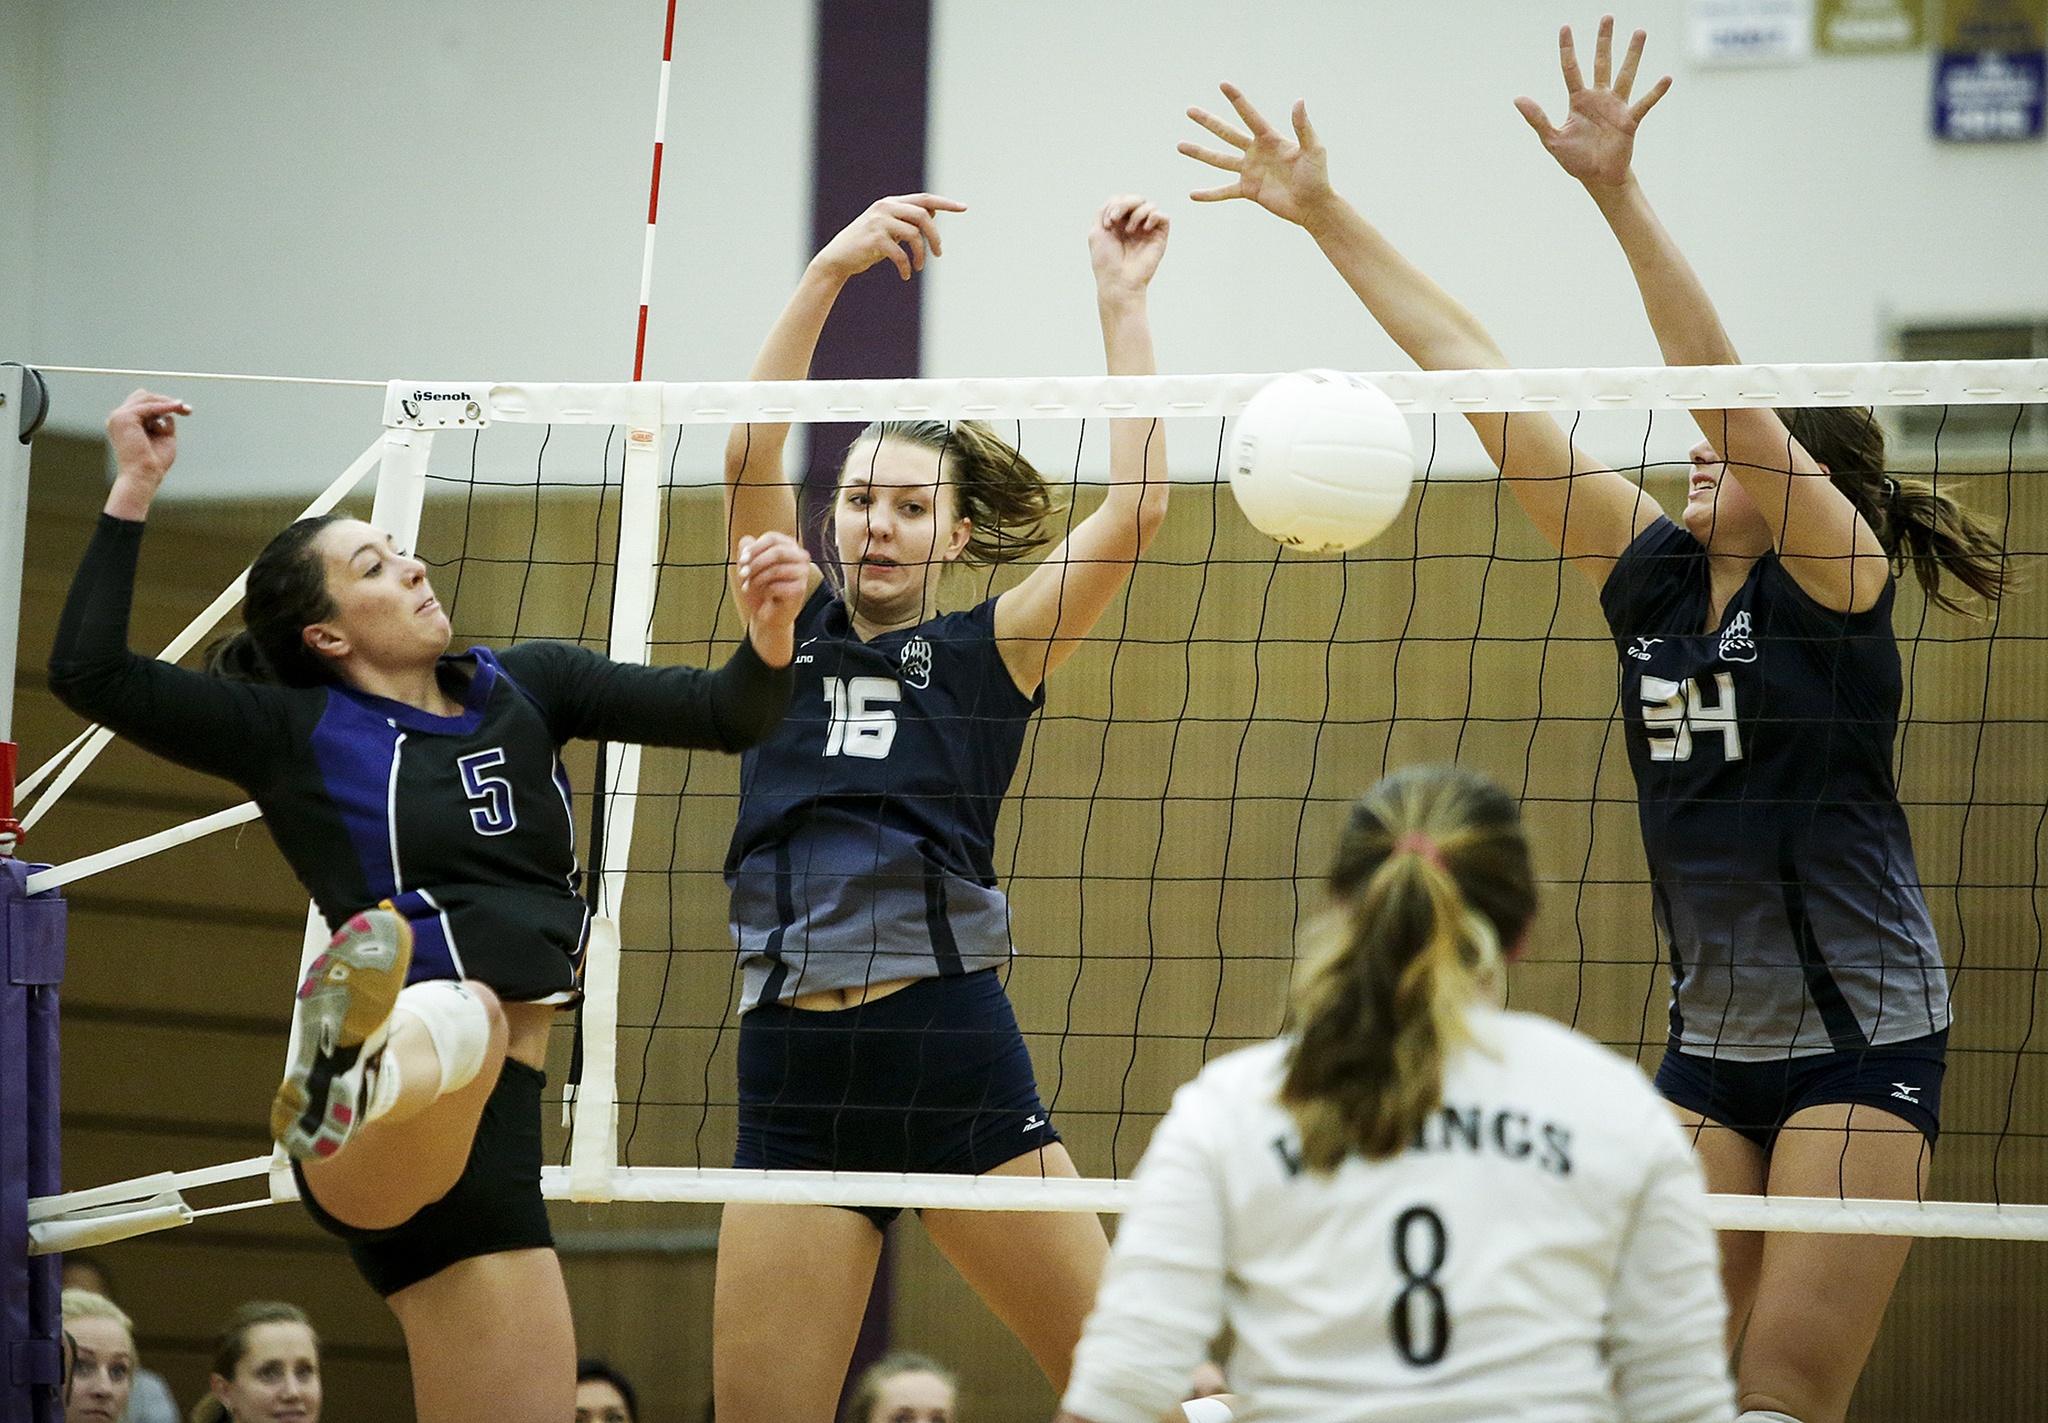 Lake Stevens’ Gabby Gunterman (5) leaps up as Glacier Peak’s Lauren Sanders (16) and Sydney Petersen (34) make a block attempt during a game at Lake Stevens High School on Tuesday, Oct. 18. (Ian Terry / The Herald)